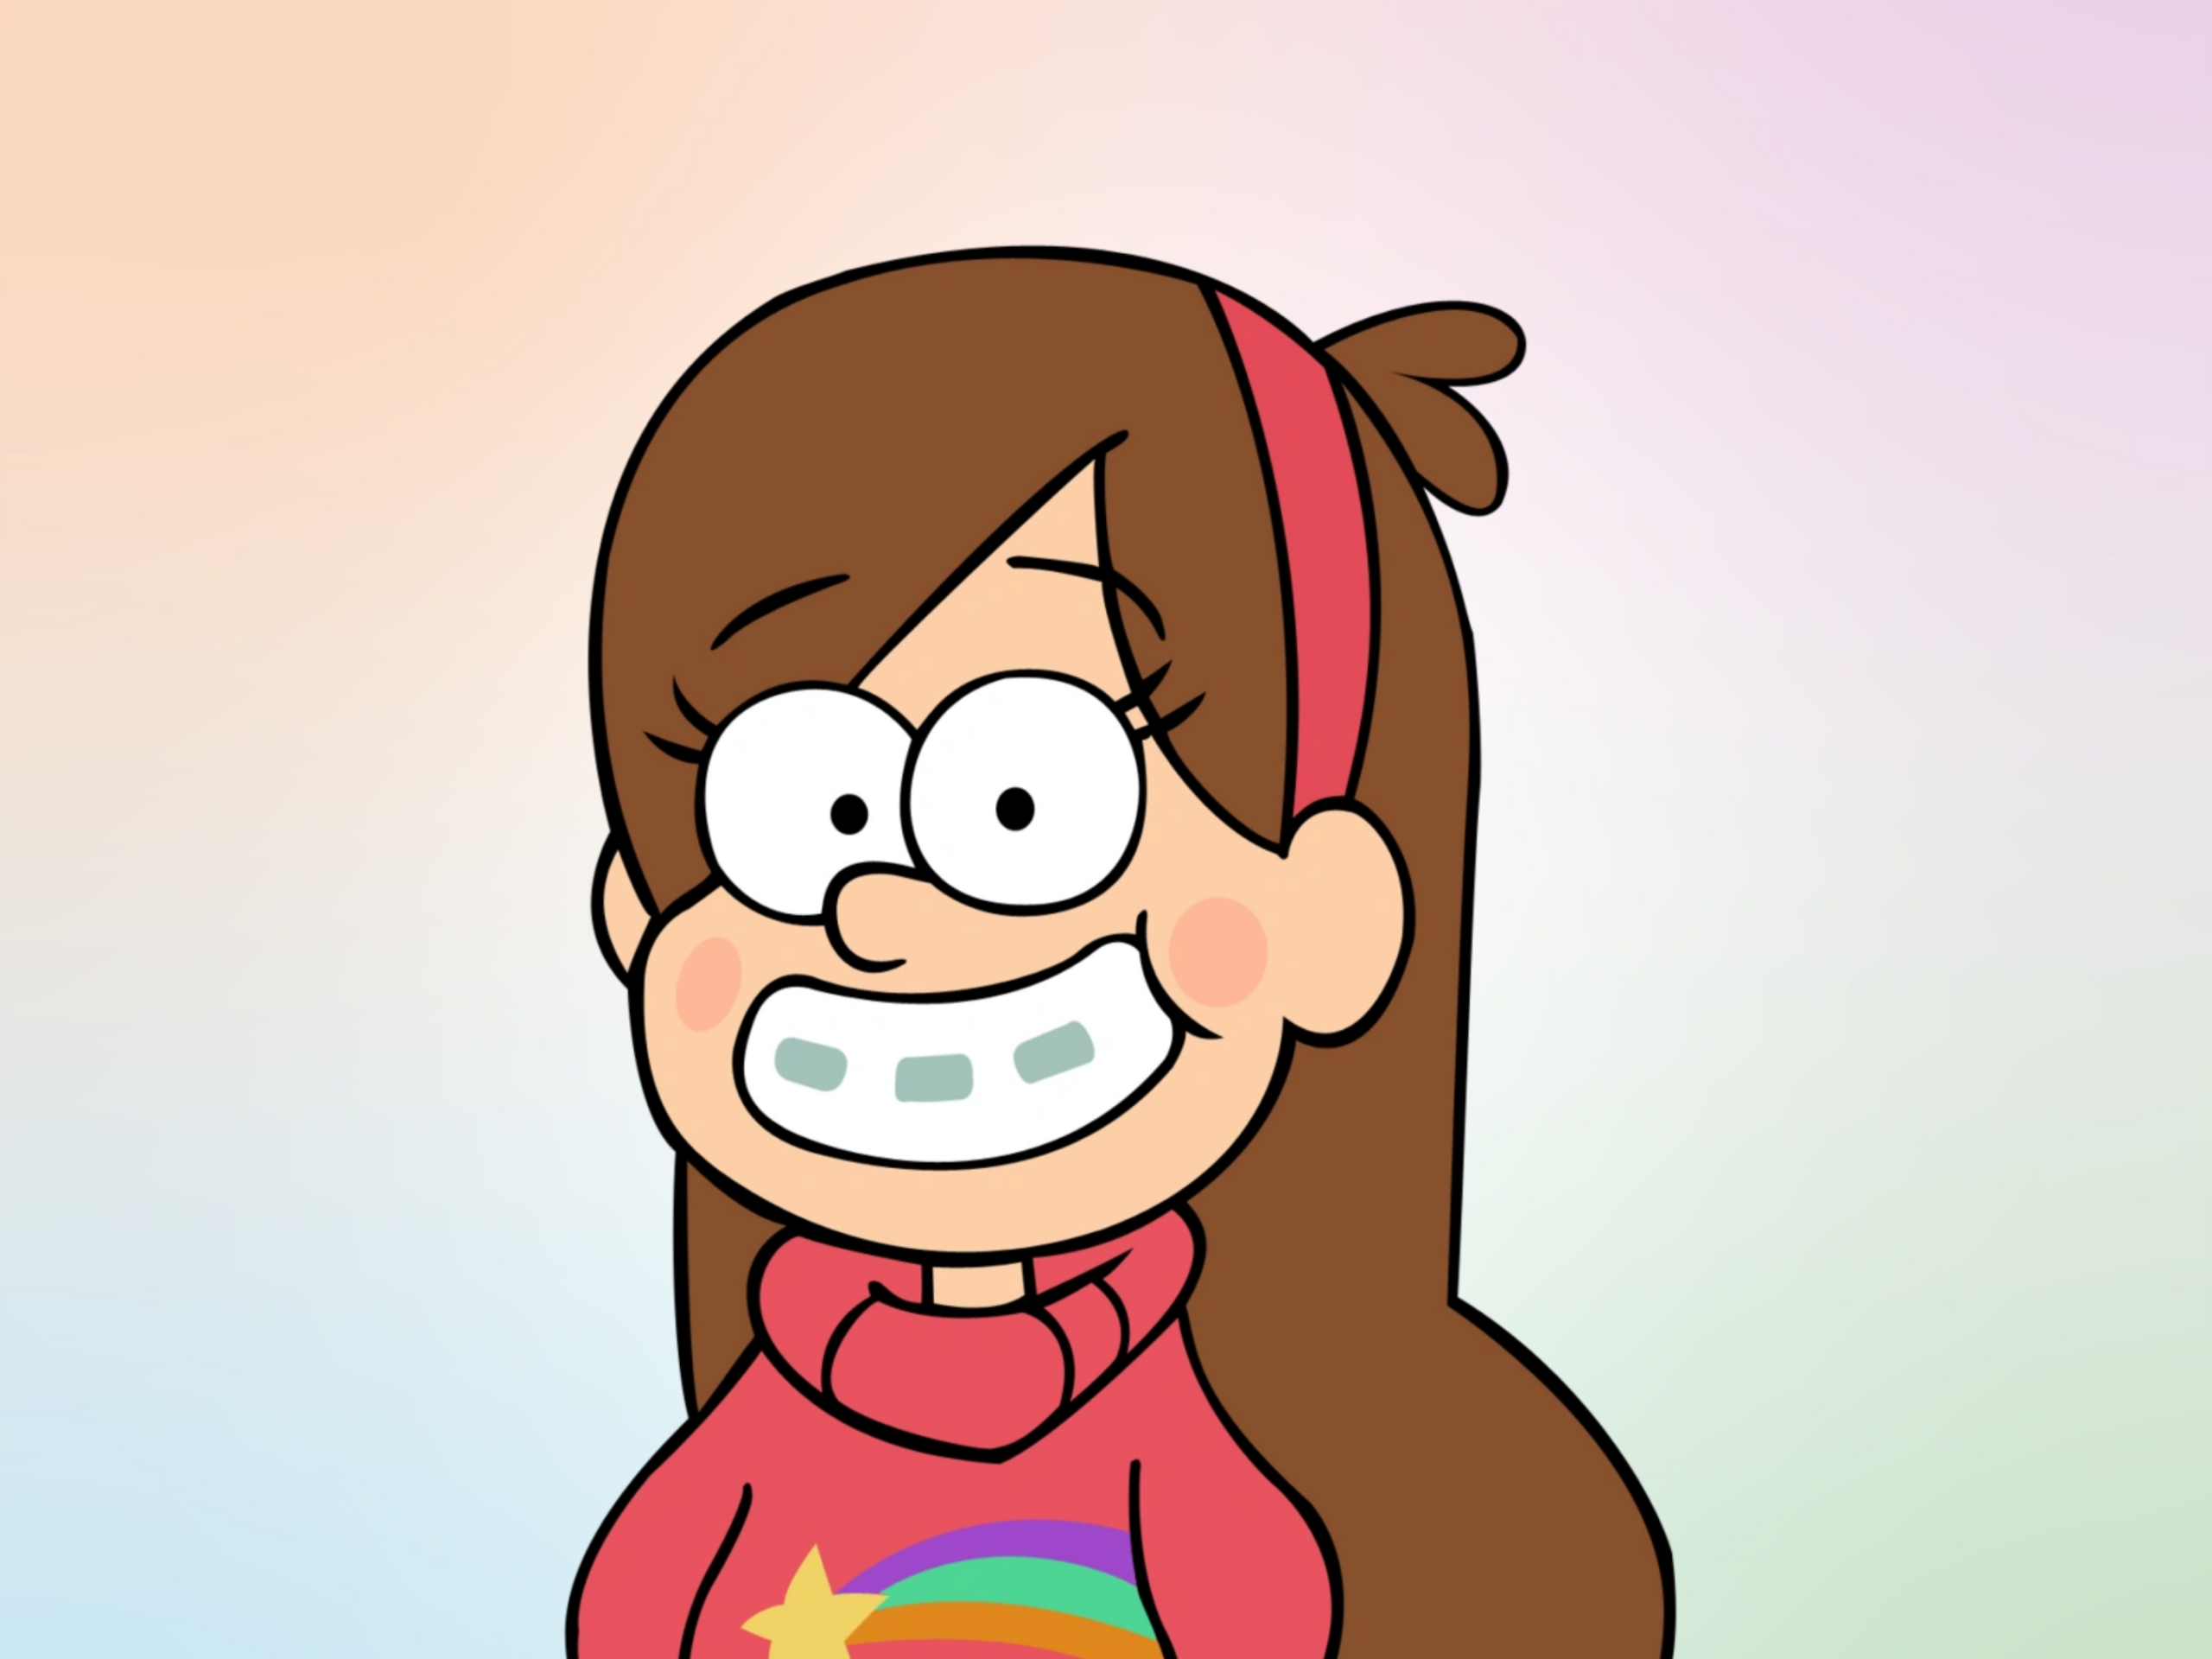 Mabel pines personality type